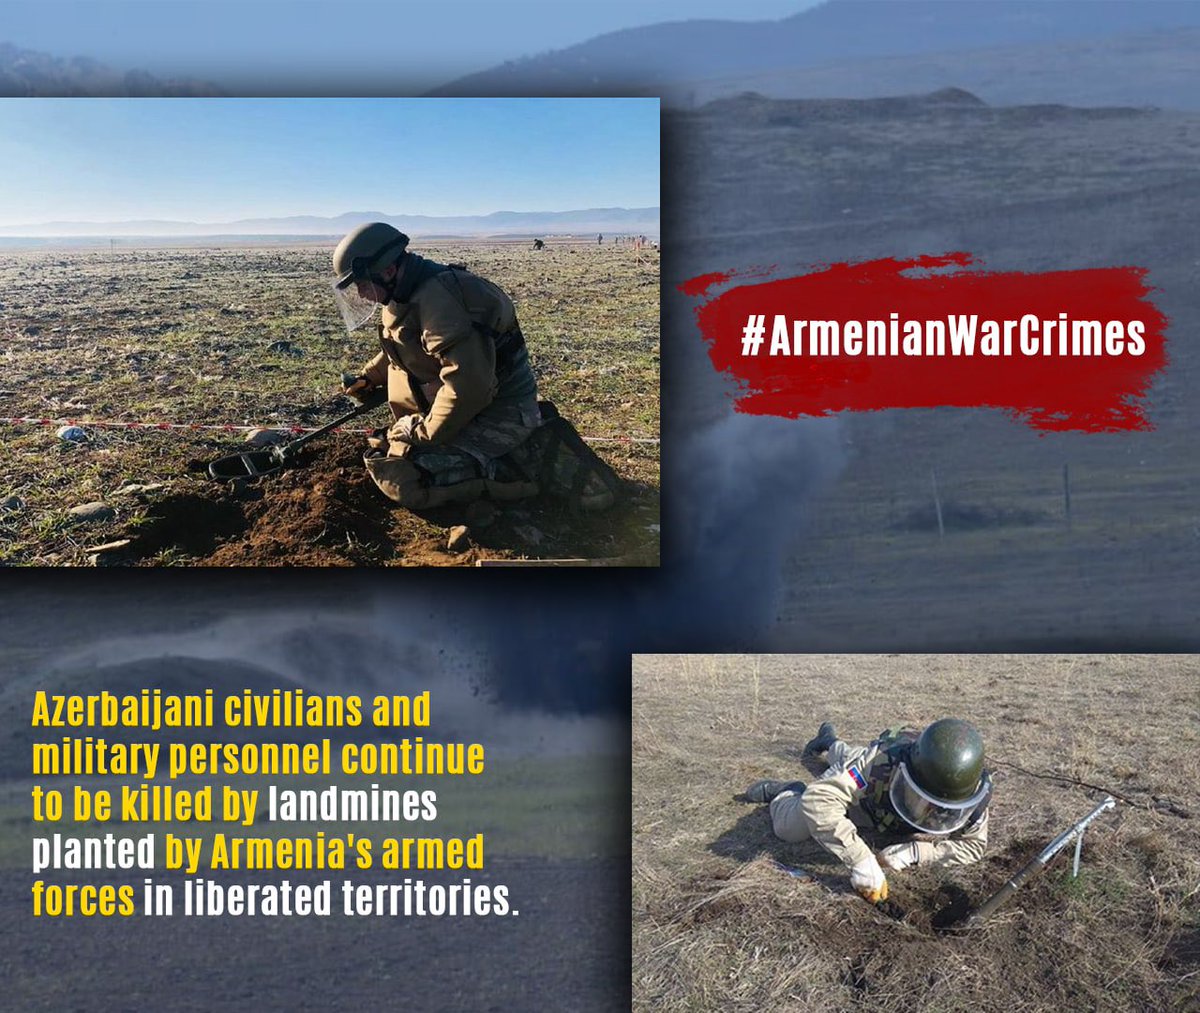 🚨 For 30 years, our lands were hidden battlefields, filled with millions of silent threats by #Armenia. #Landmines, left by the occupation, continue to claim innocent lives in #Azerbaijan. 
❗️Each step in our soil must be a step towards #peace, not peril. #MineAwarenessDay…